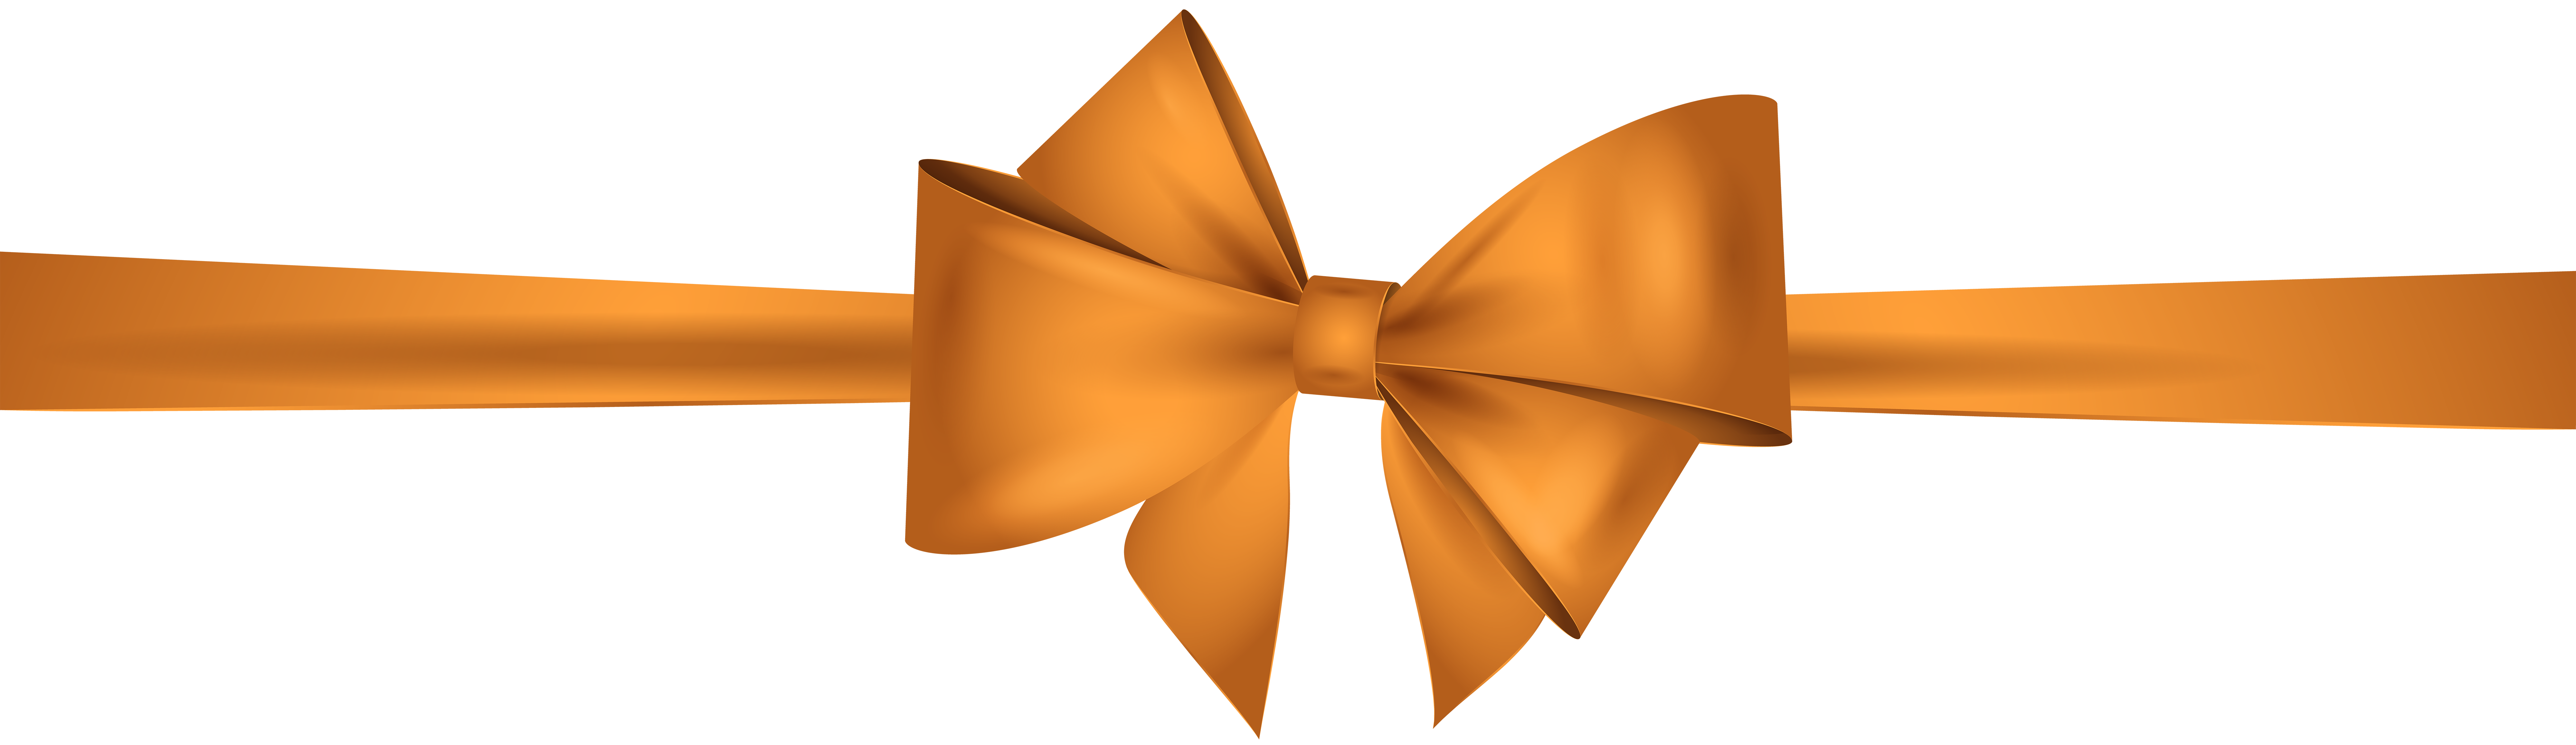 Beautiful bows from orange ribbon on transparent background PNG.png -  Similar PNG